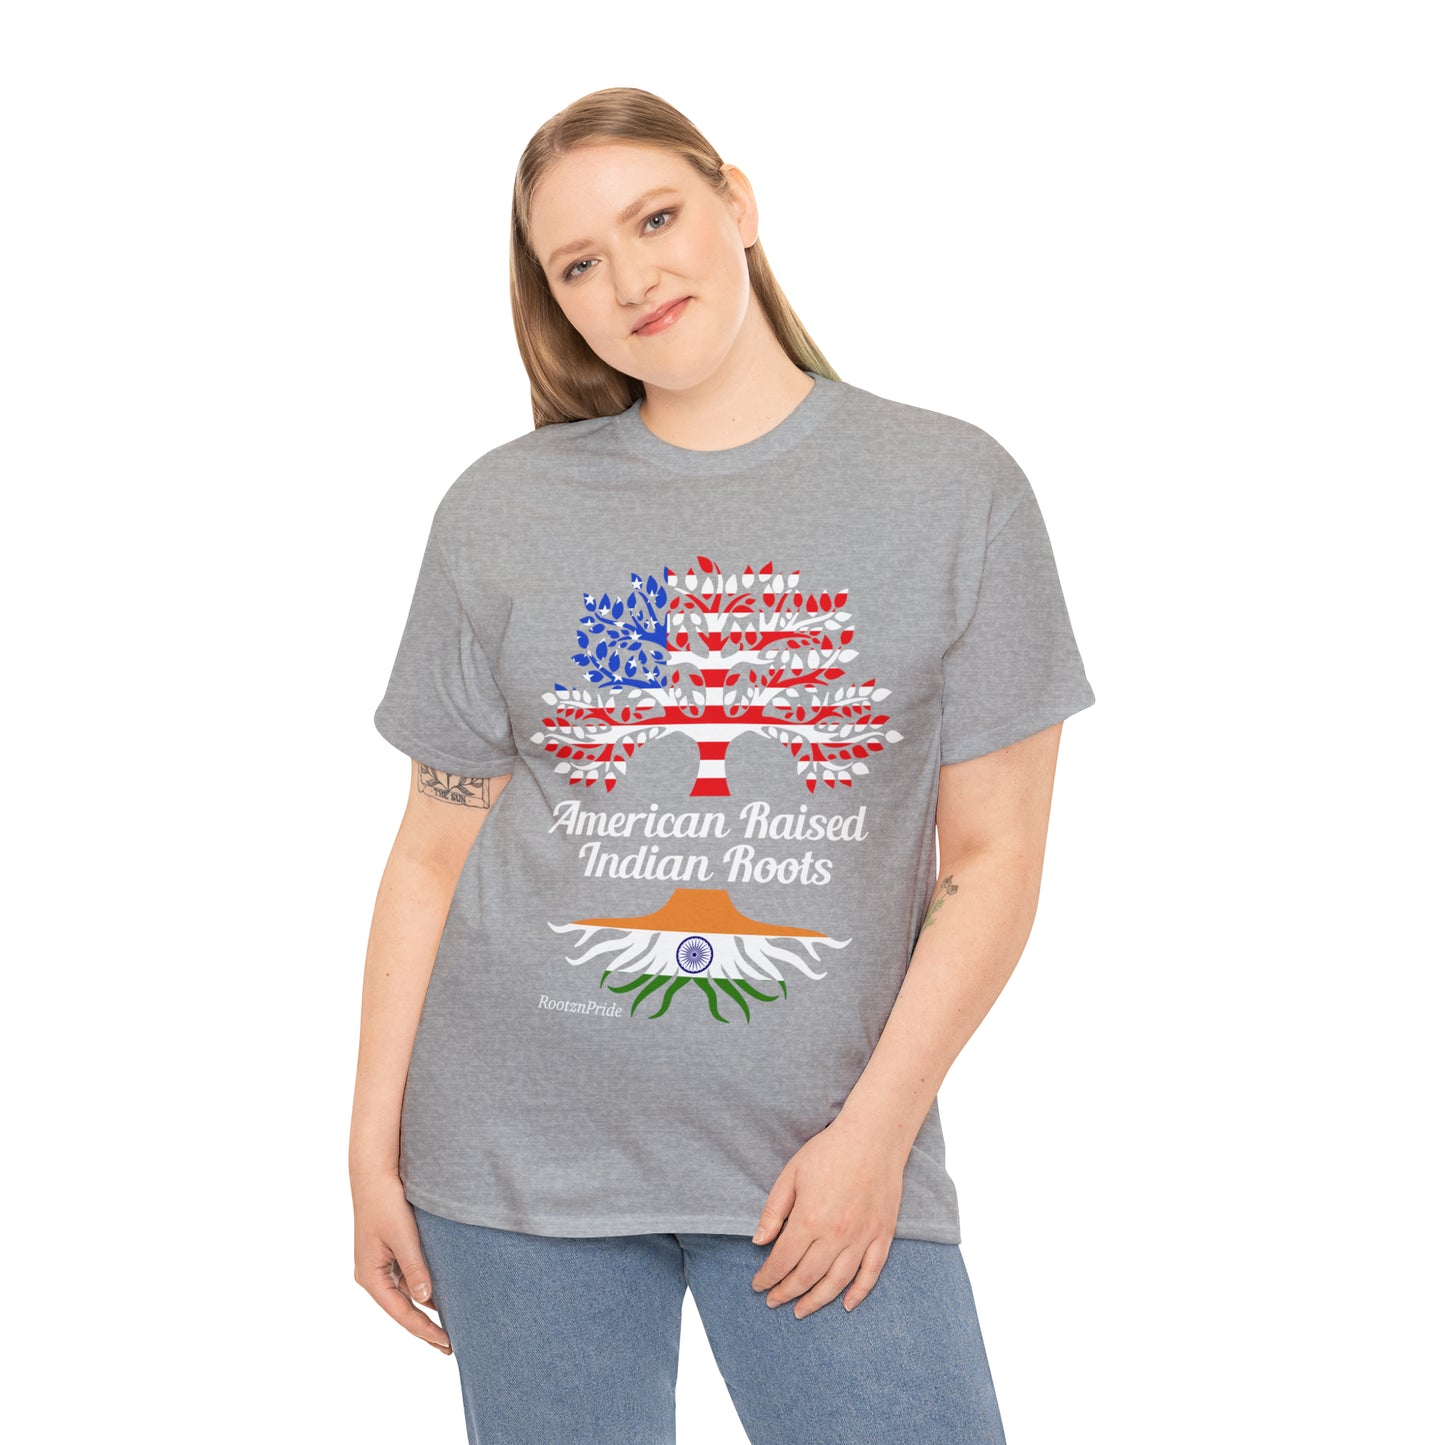 Indian Roots Design 5: Adult T-Shirt